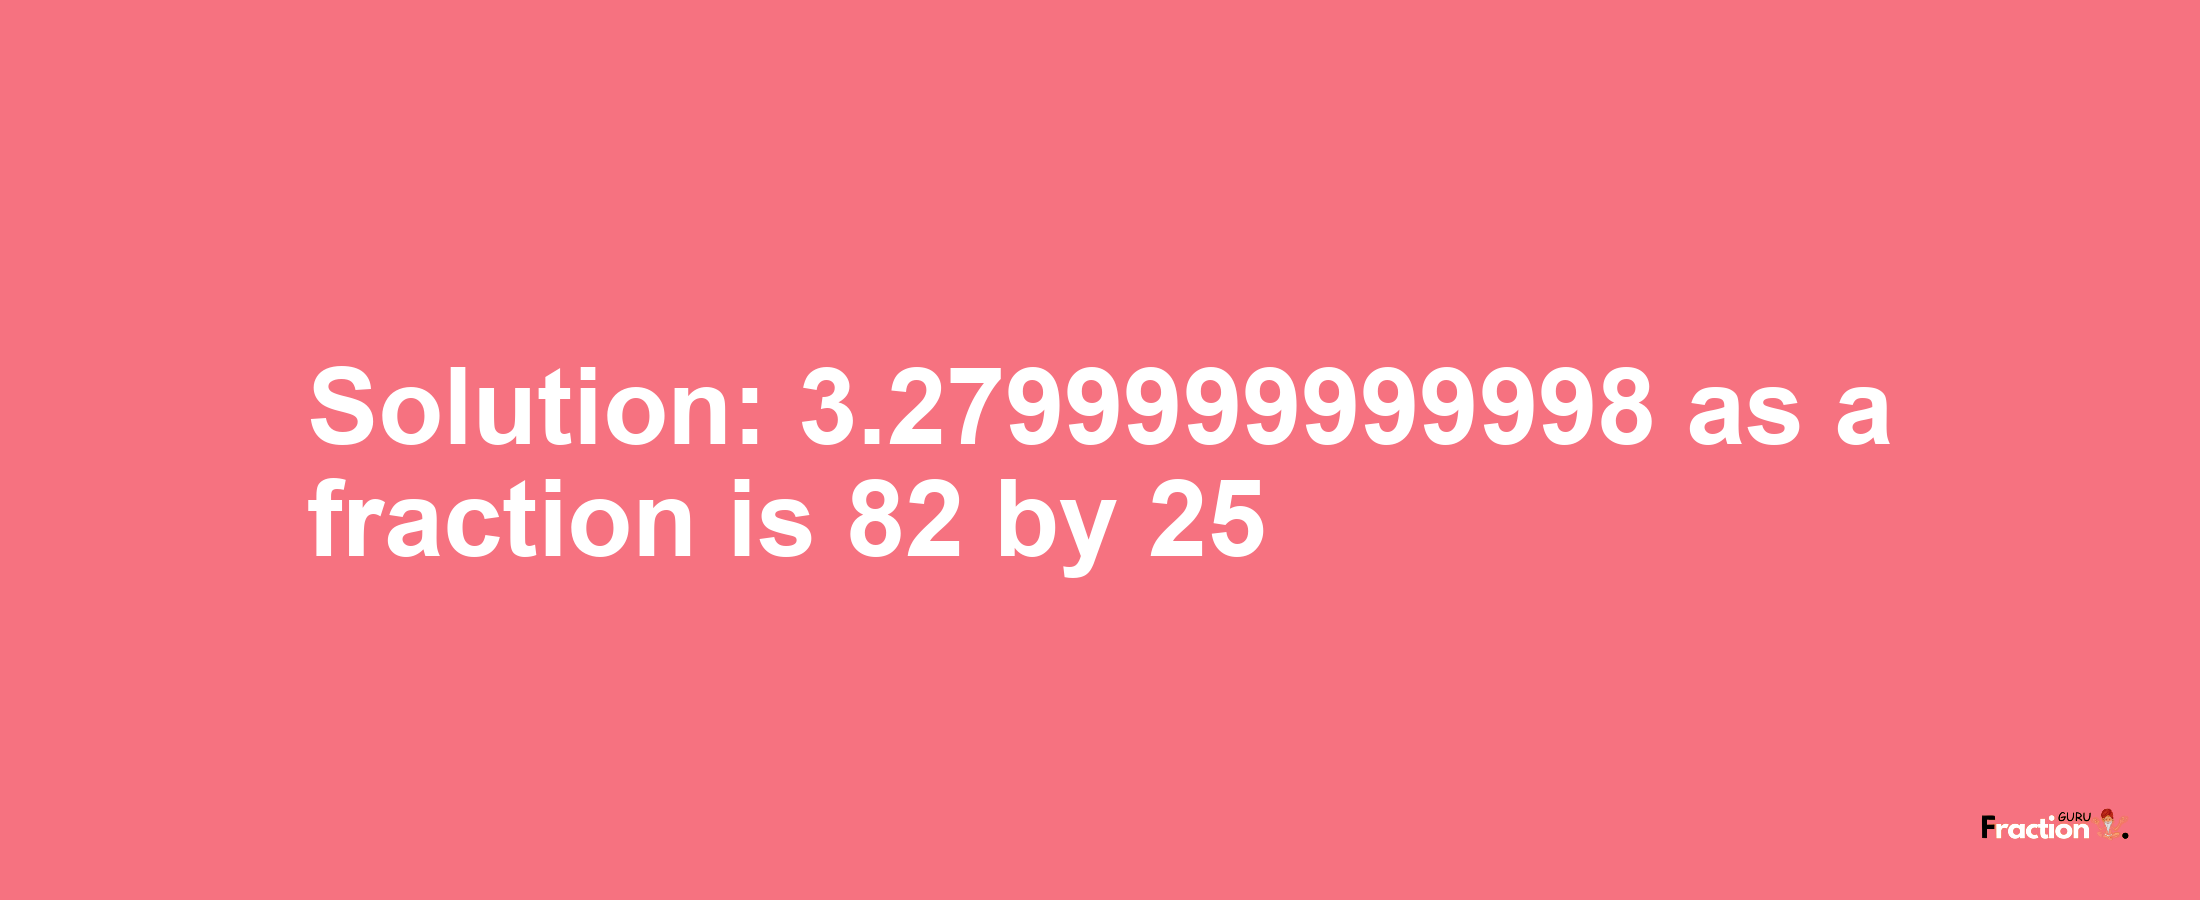 Solution:3.2799999999998 as a fraction is 82/25